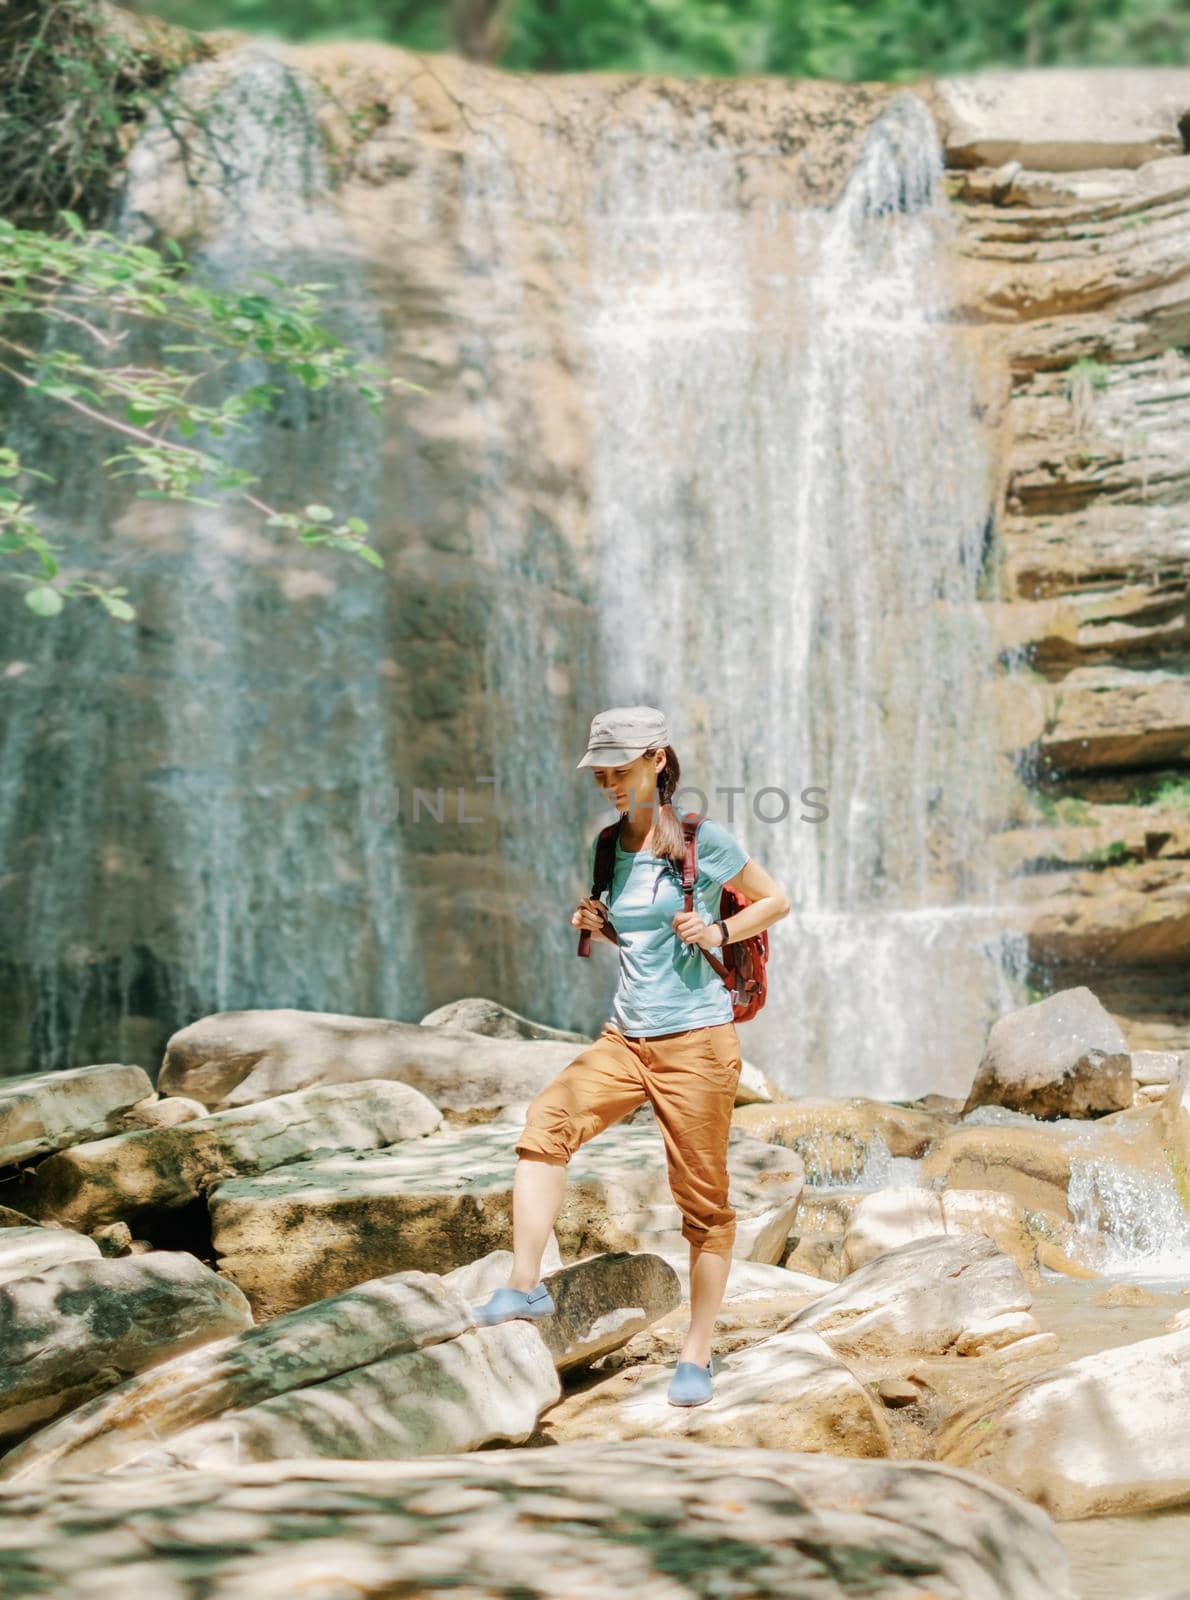 Explorer backpacker young woman walking on stones in front of waterfall outdoor on sunny day.